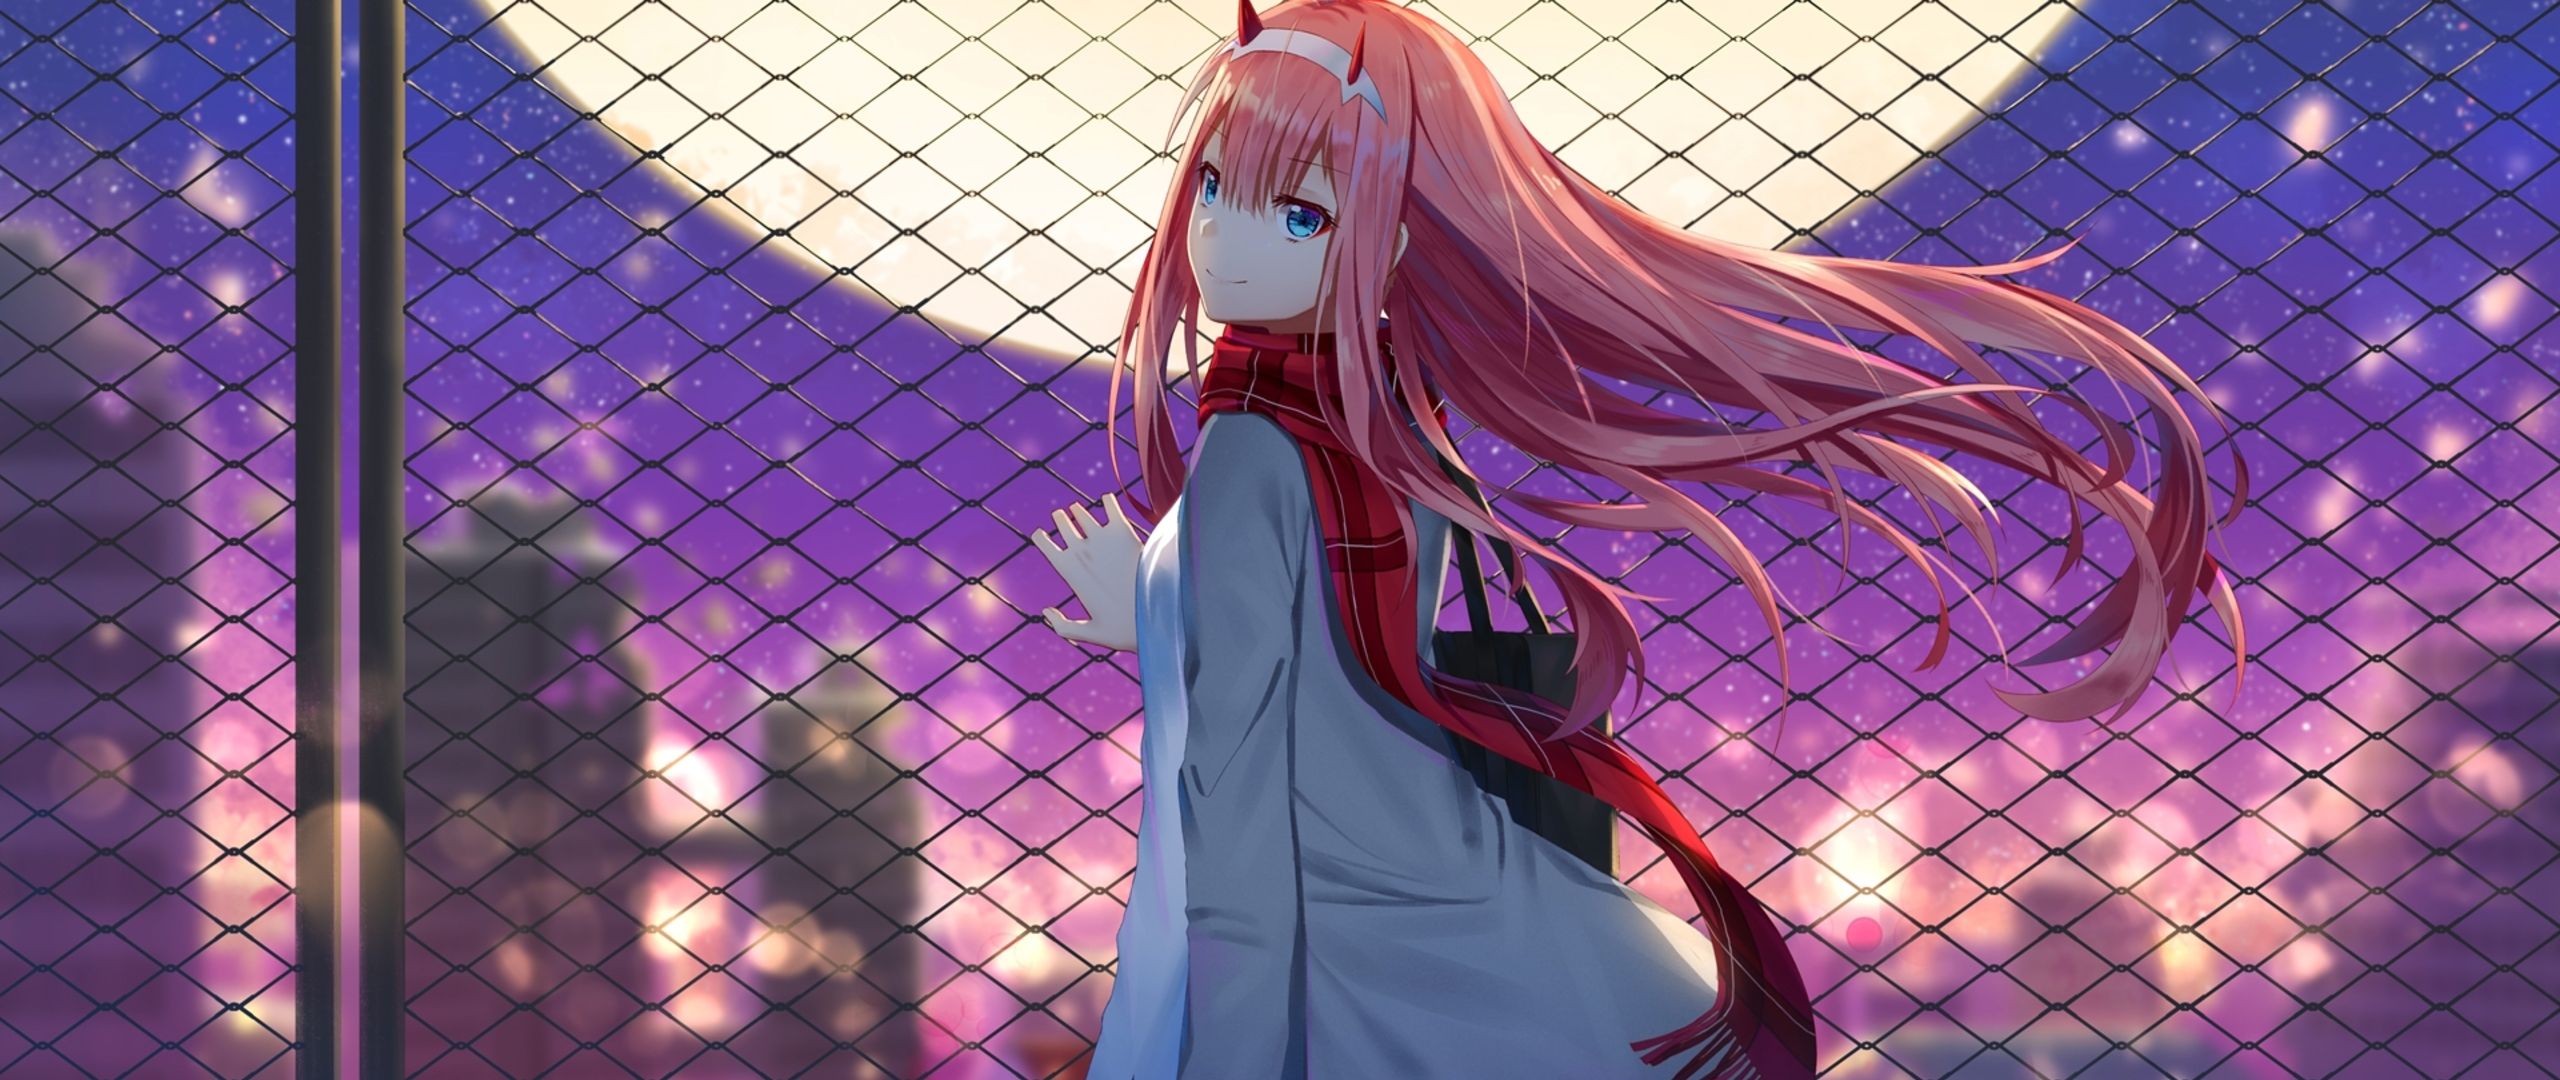 Zero Two Darling In The Franxx 2560x1080 Resolution HD 4k Wallpaper, Image, Background, Photo and Picture